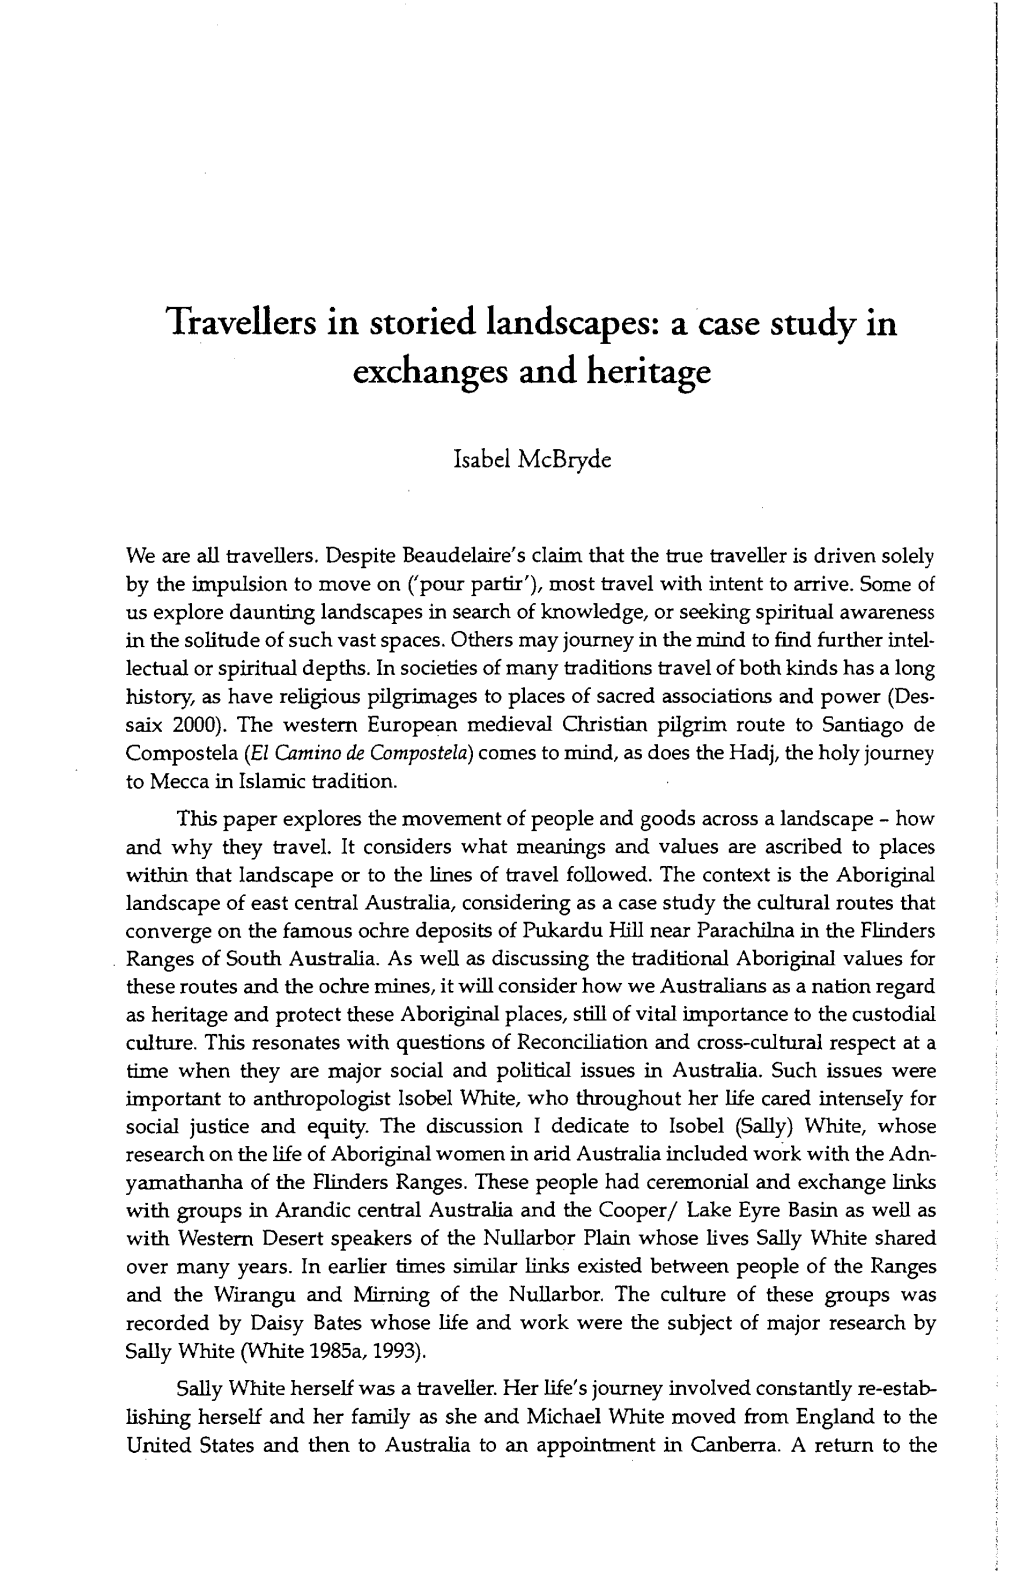 Travellers in Storied Landscapes: a Case Study in Exchanges and Heritage